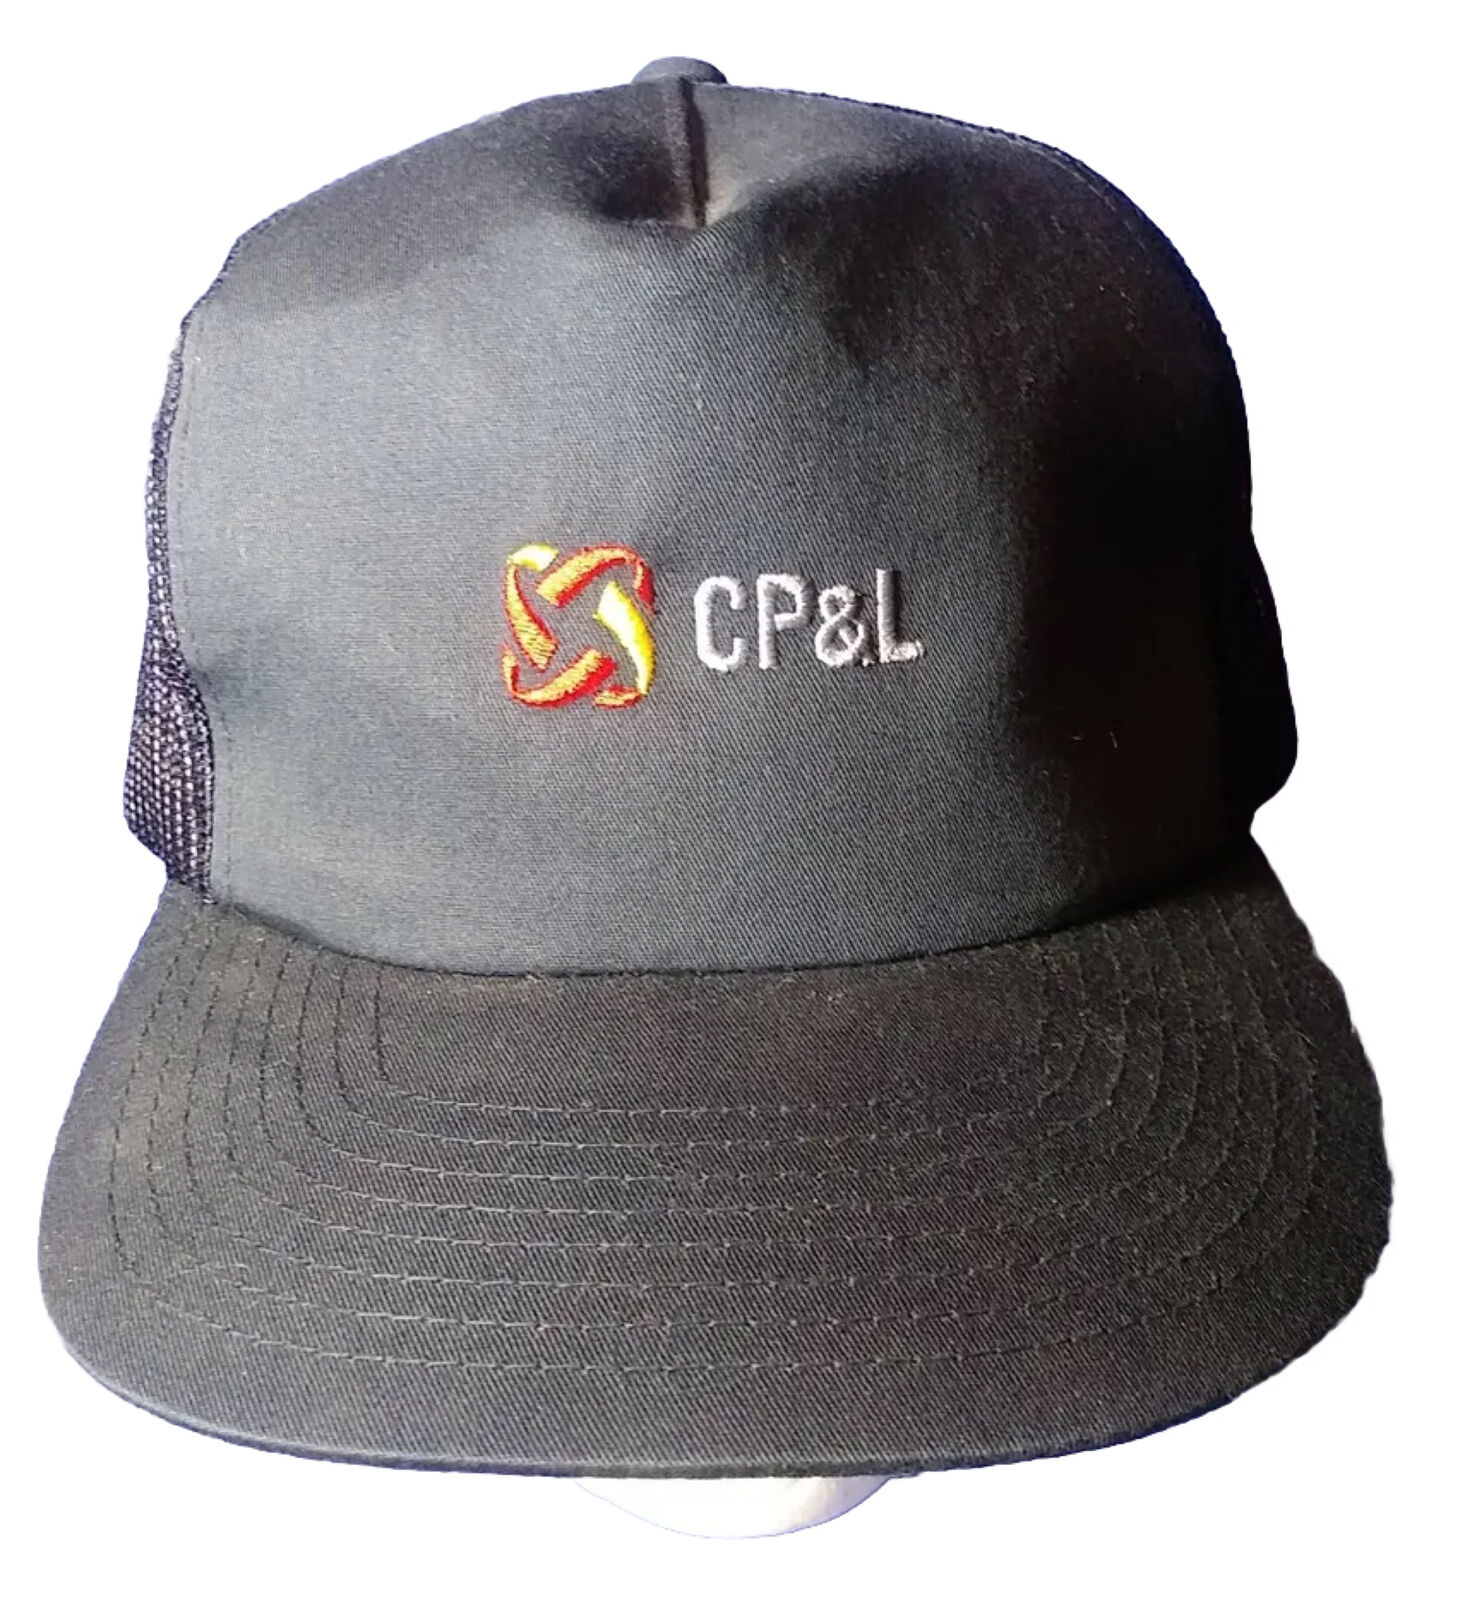 Vintage Cp&l Carolina Power And Light Baseball Cap new without tag